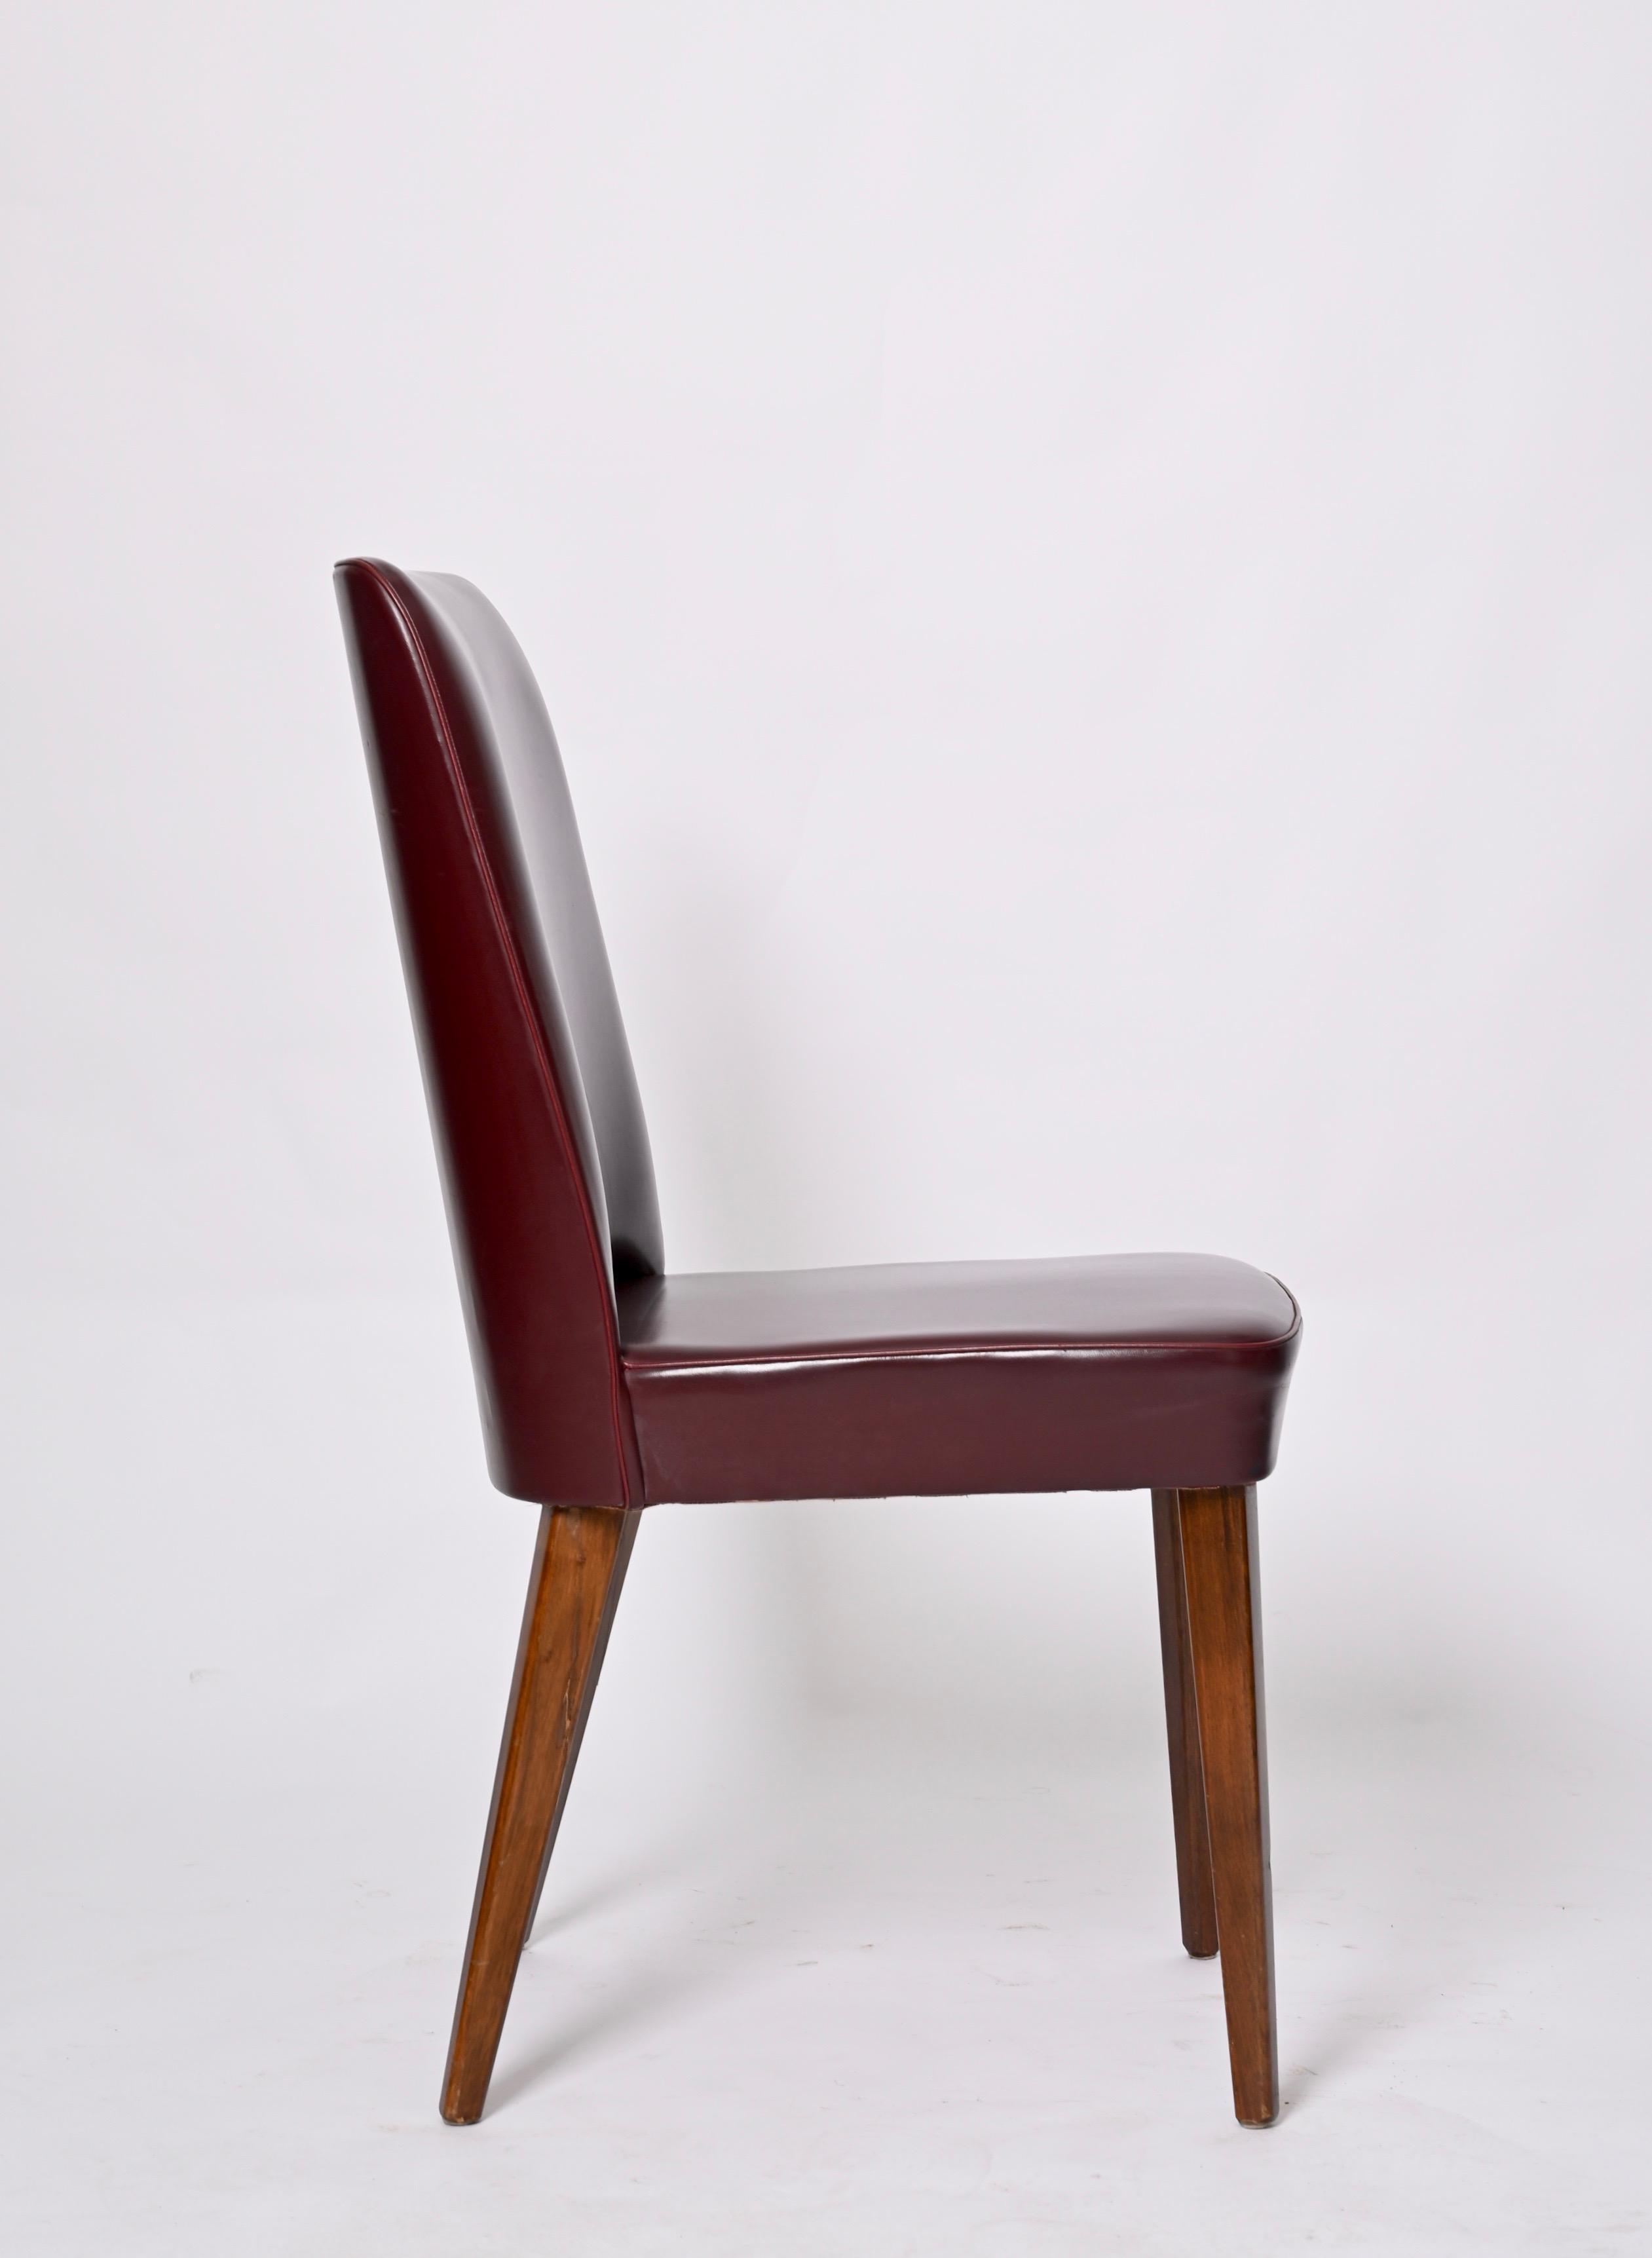 Pair of Bordeaux Leather Chairs by Anonima Castelli, Italy, 1950s For Sale 11